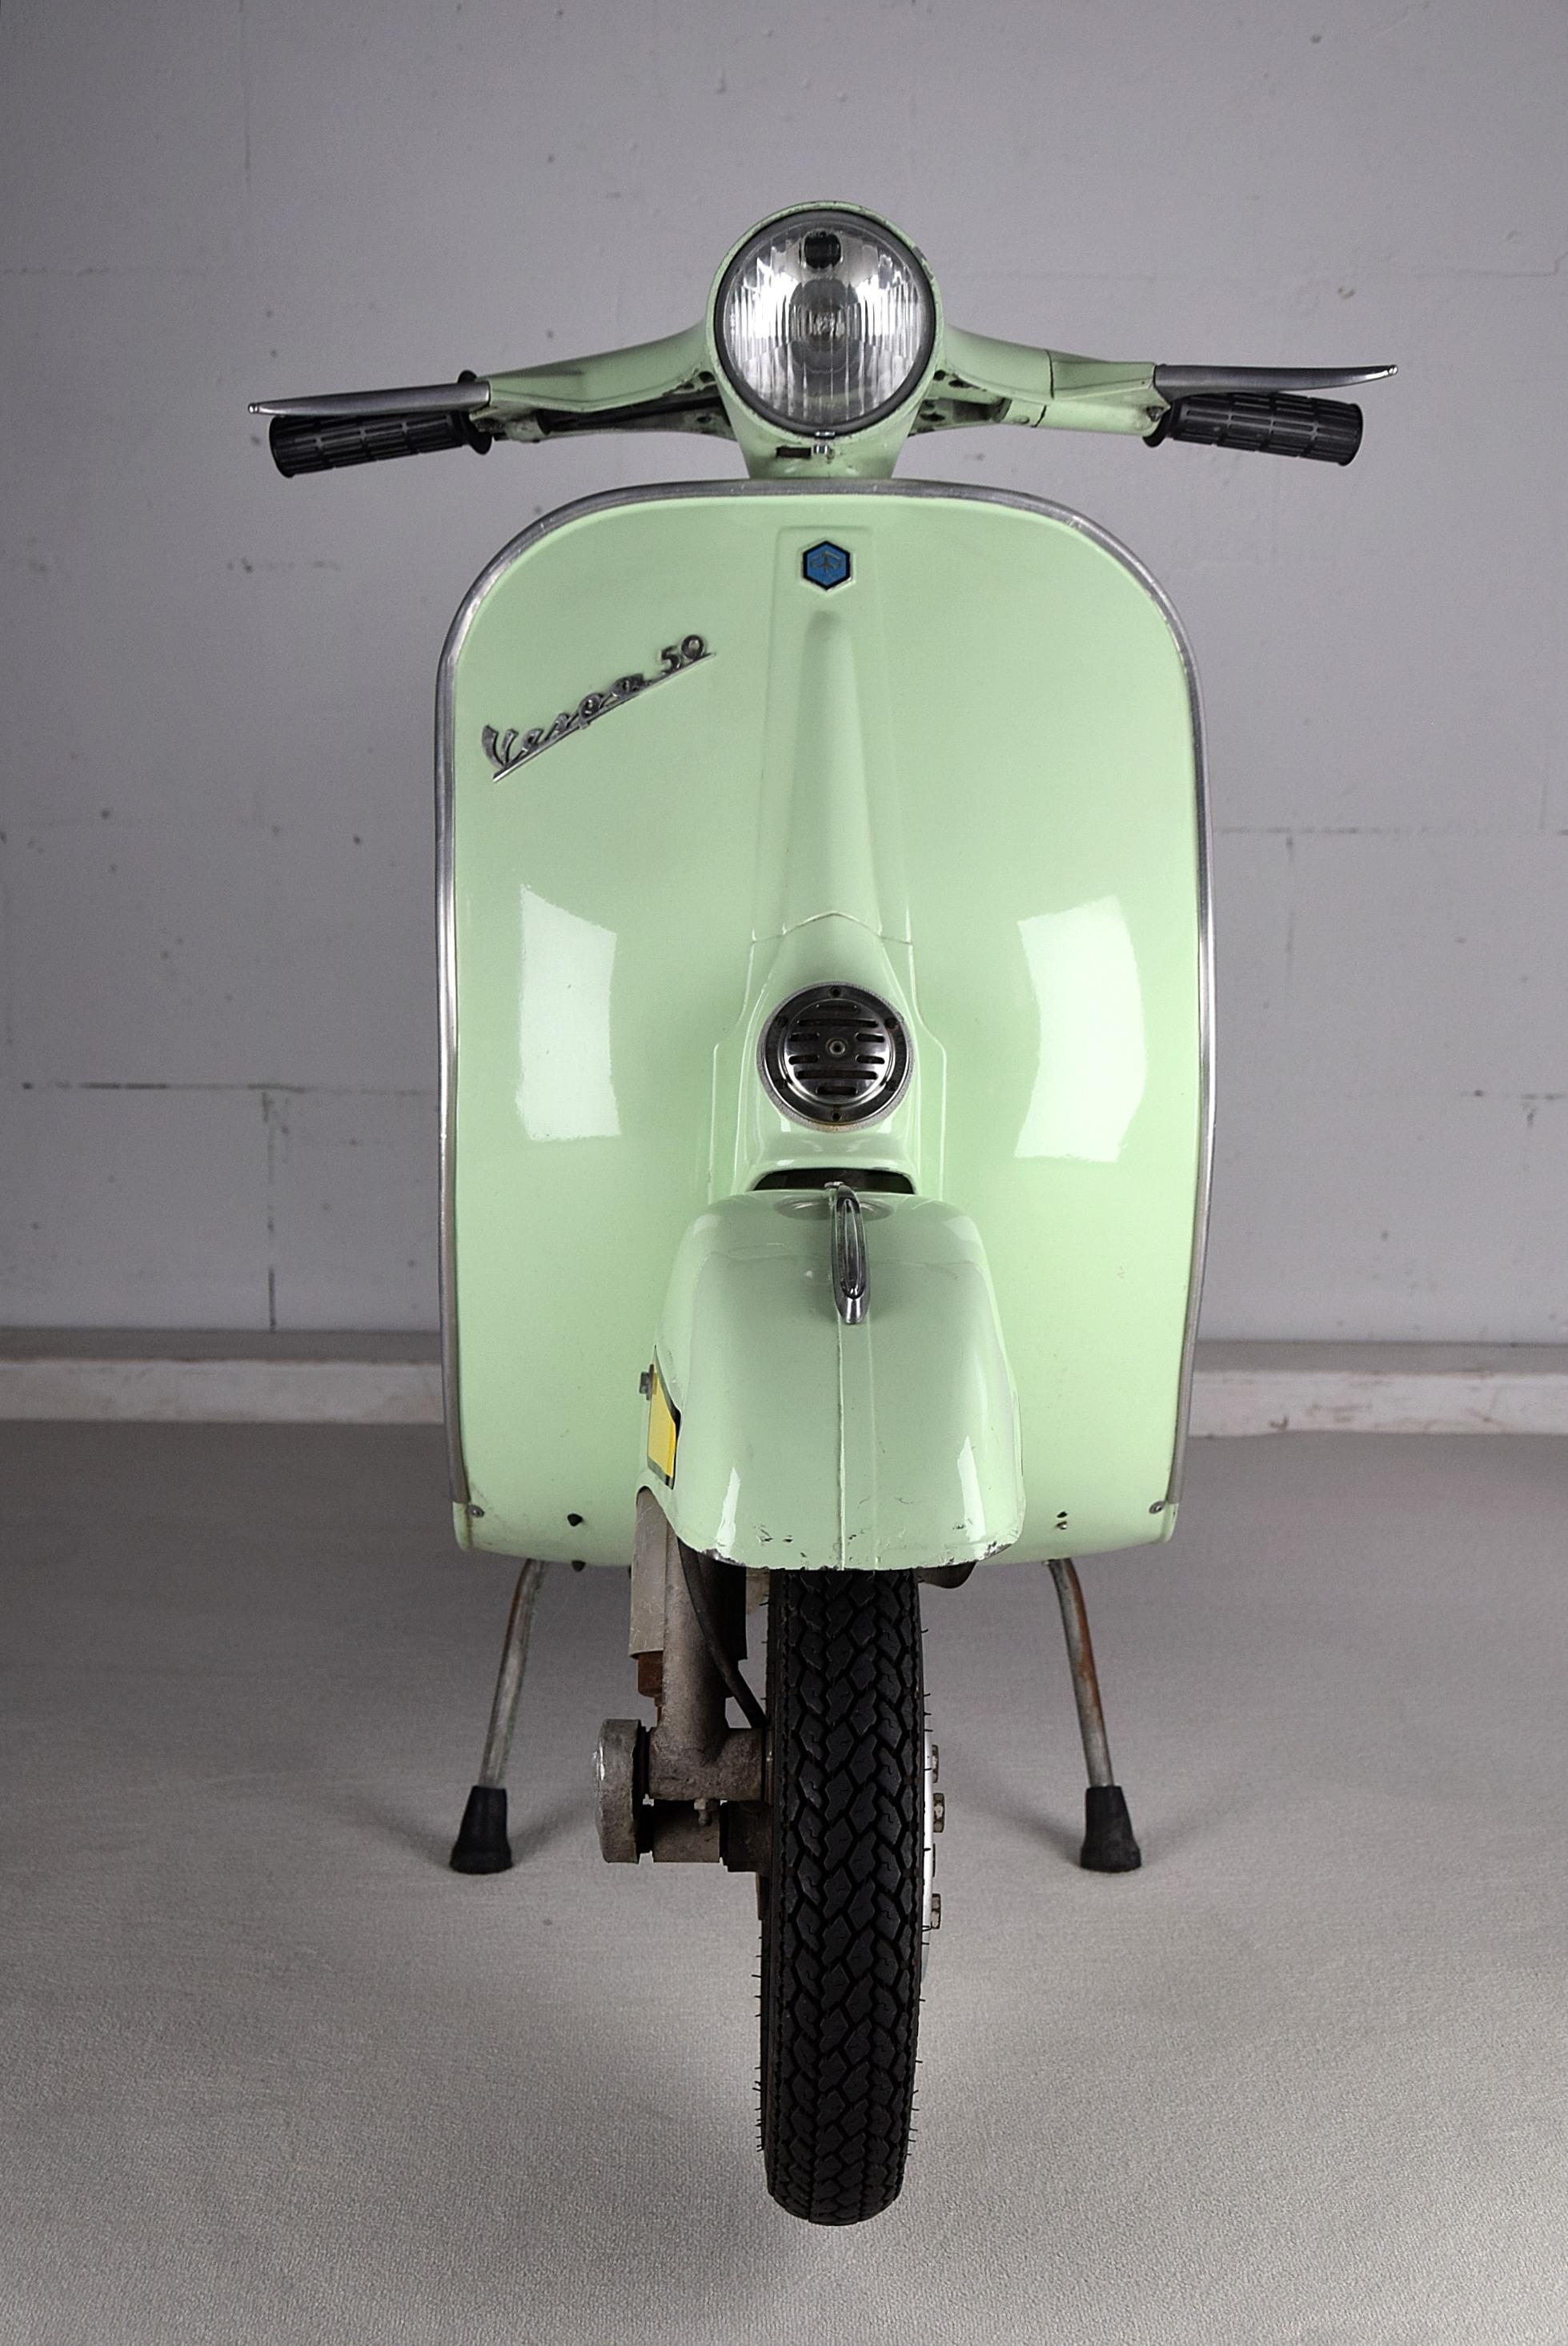 Piaggio model Vespa V50R from 1971. This stylish and elegant La Dolce VITA scooter is in great condition. This 50cc has been stored for the past 15 years. It has just been serviced. The carburator has been cleaned, oil changed, new tires, new cables